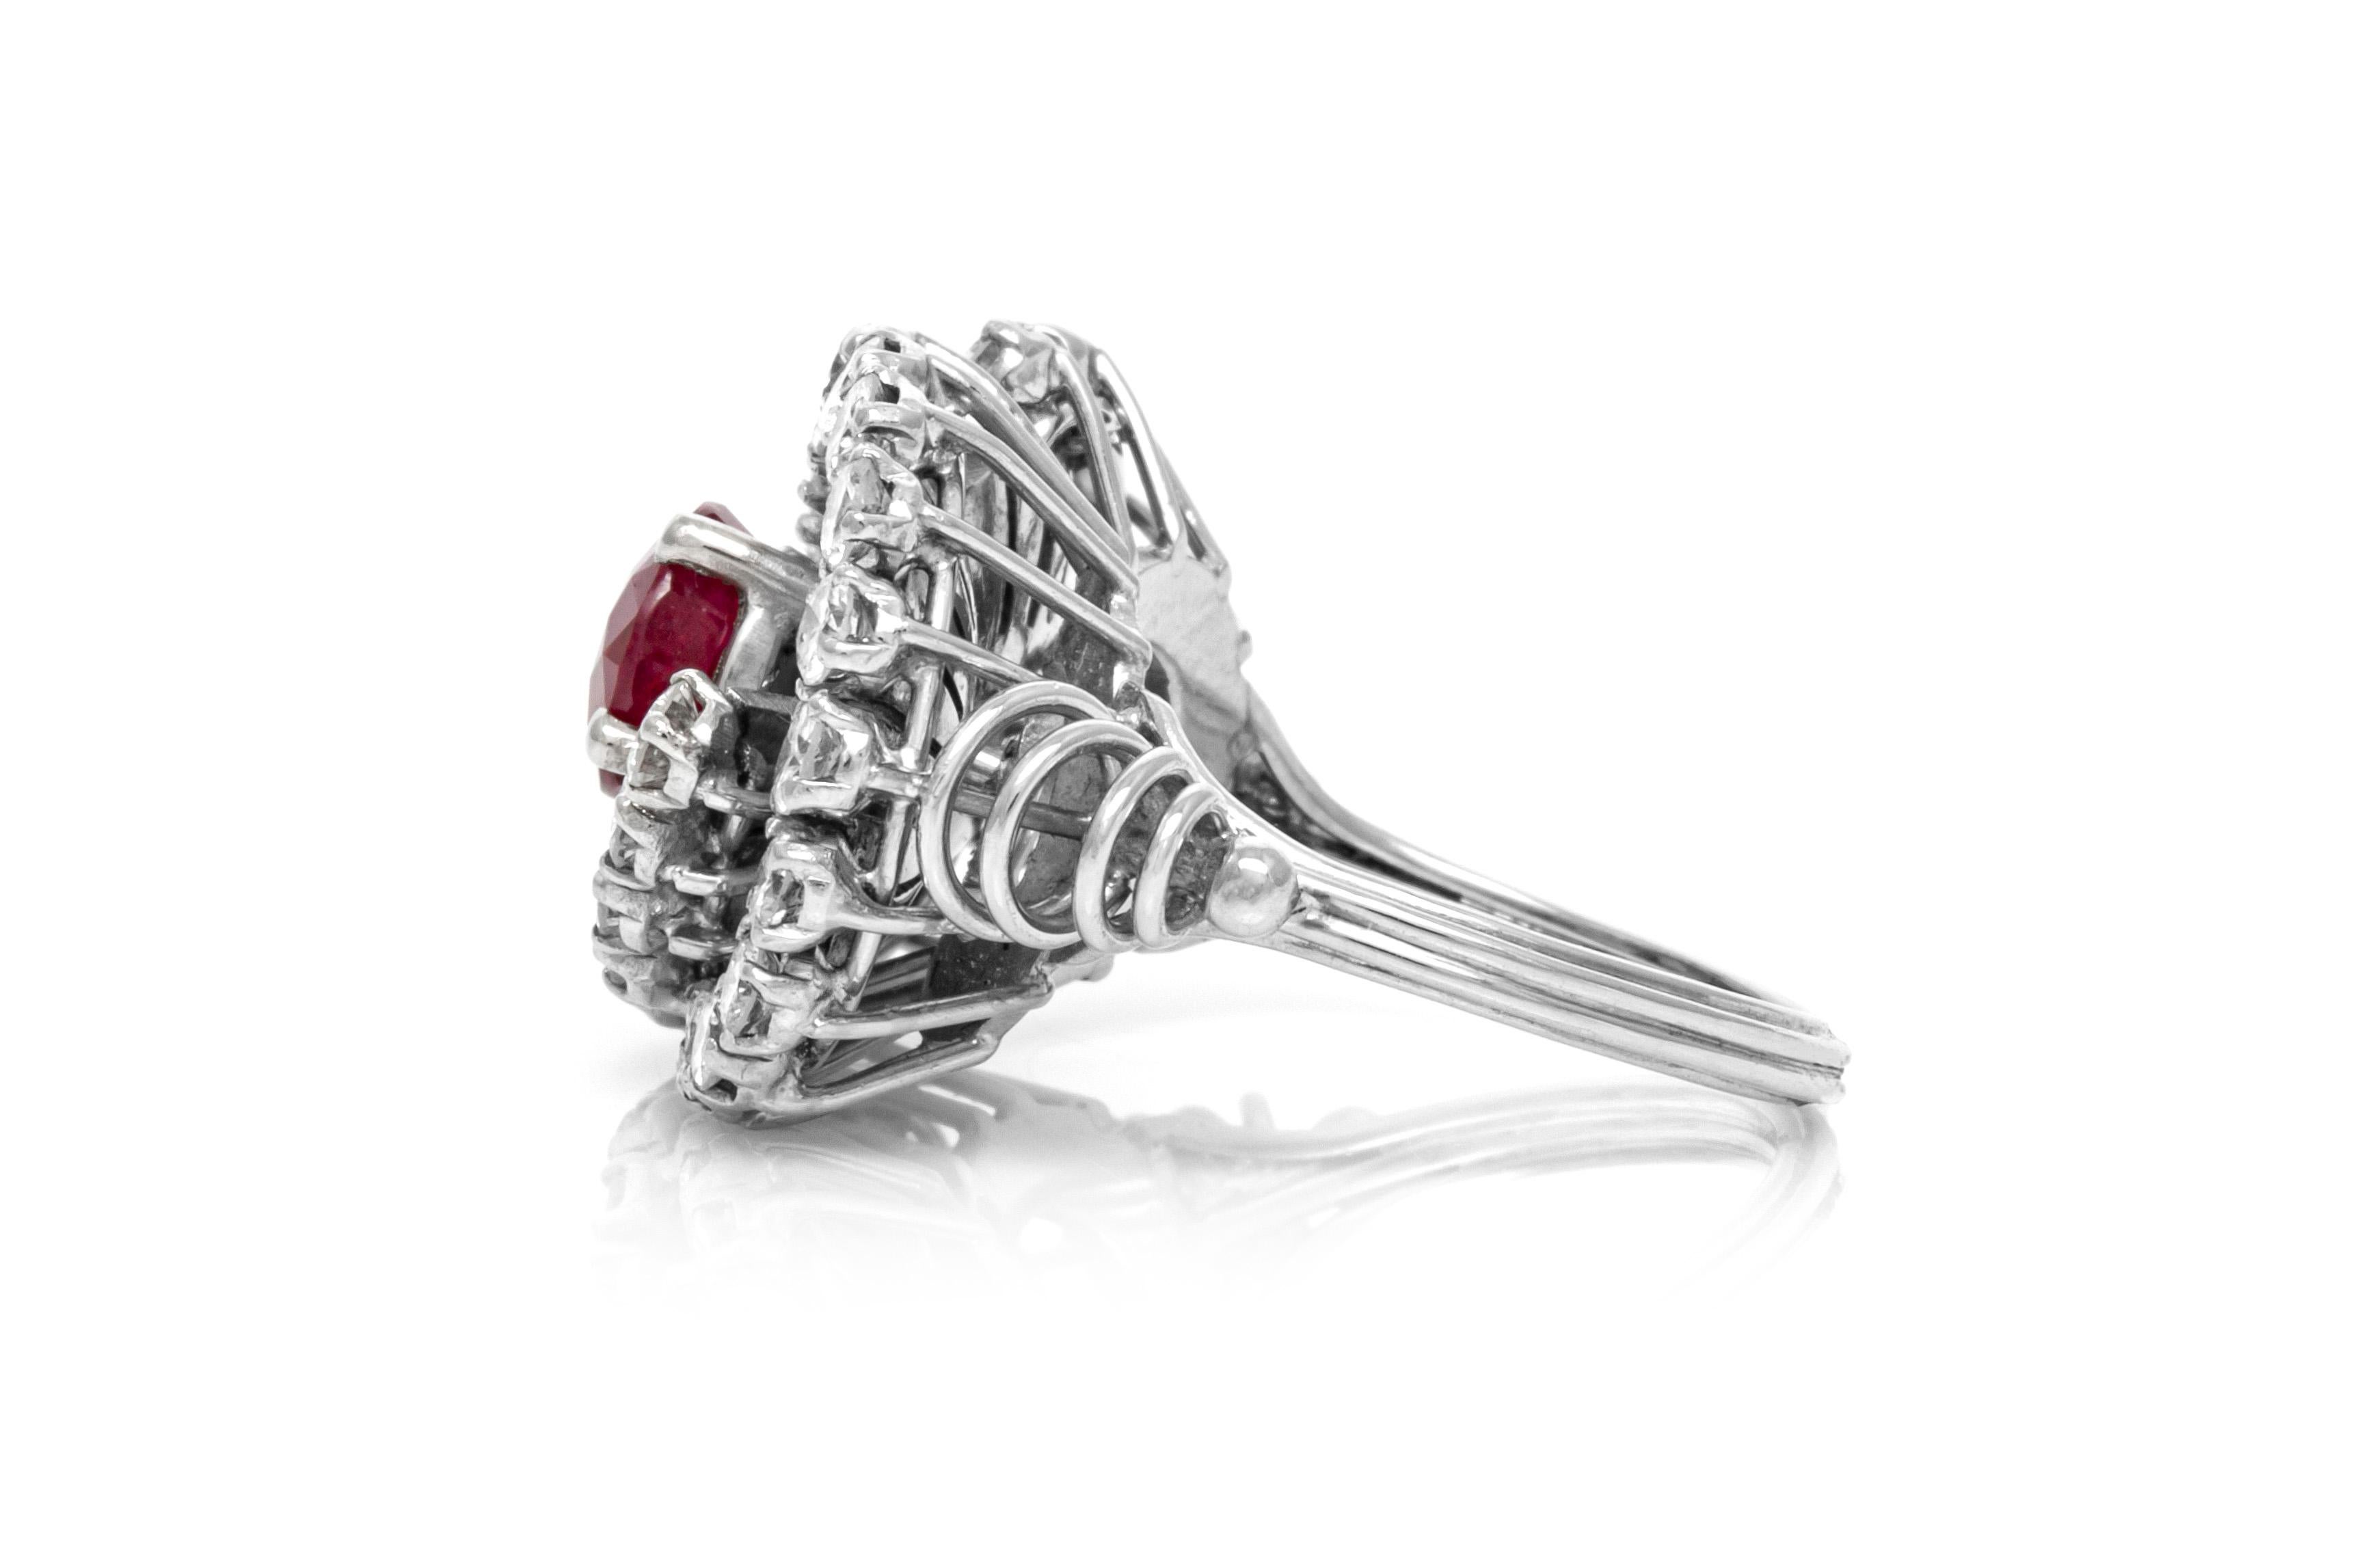 Cocktail ring finely crafted in platinum with center ruby weighing approximately 1.77 carat, and surrounding diamonds weighing approximately 2.00 carat.
The ring size is 6.5 US and 54 EU.
Circa 1950's